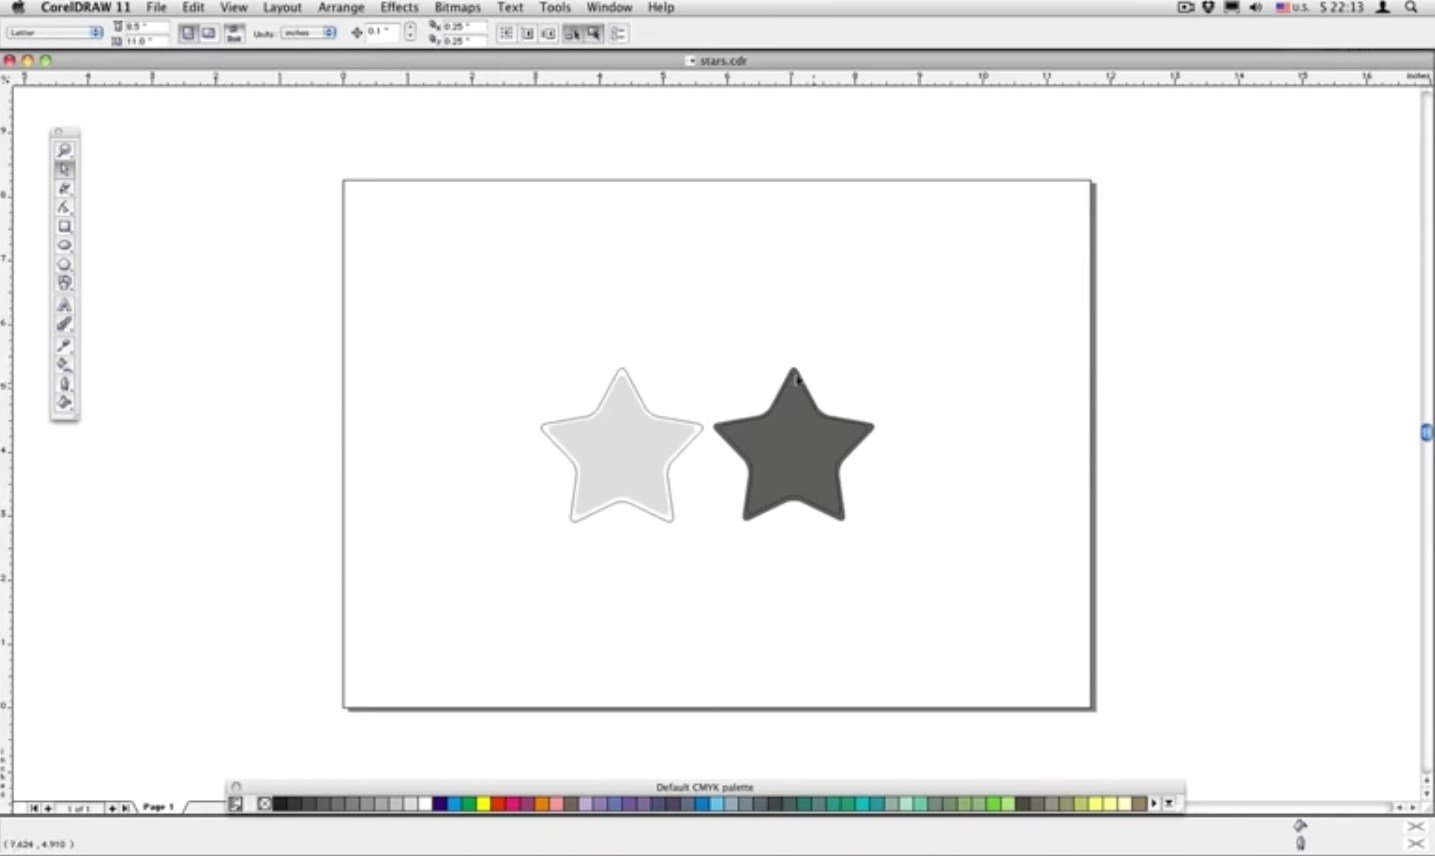 download free coreldraw for mac os